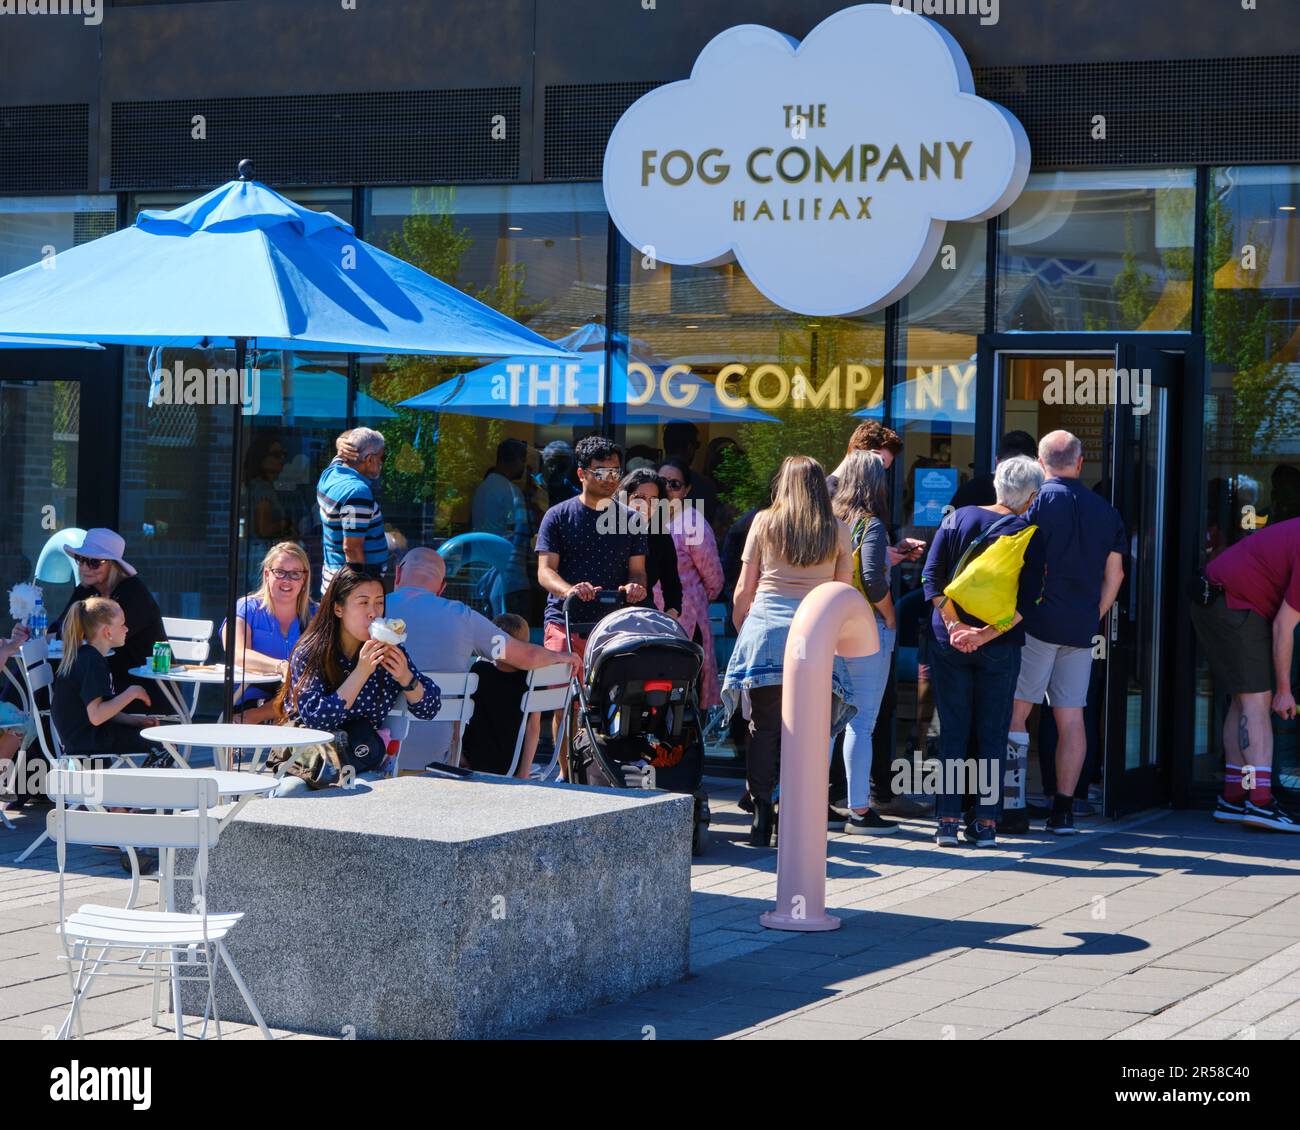 People lining up to buy ice cream at The Fog Company Halifax Stock Photo